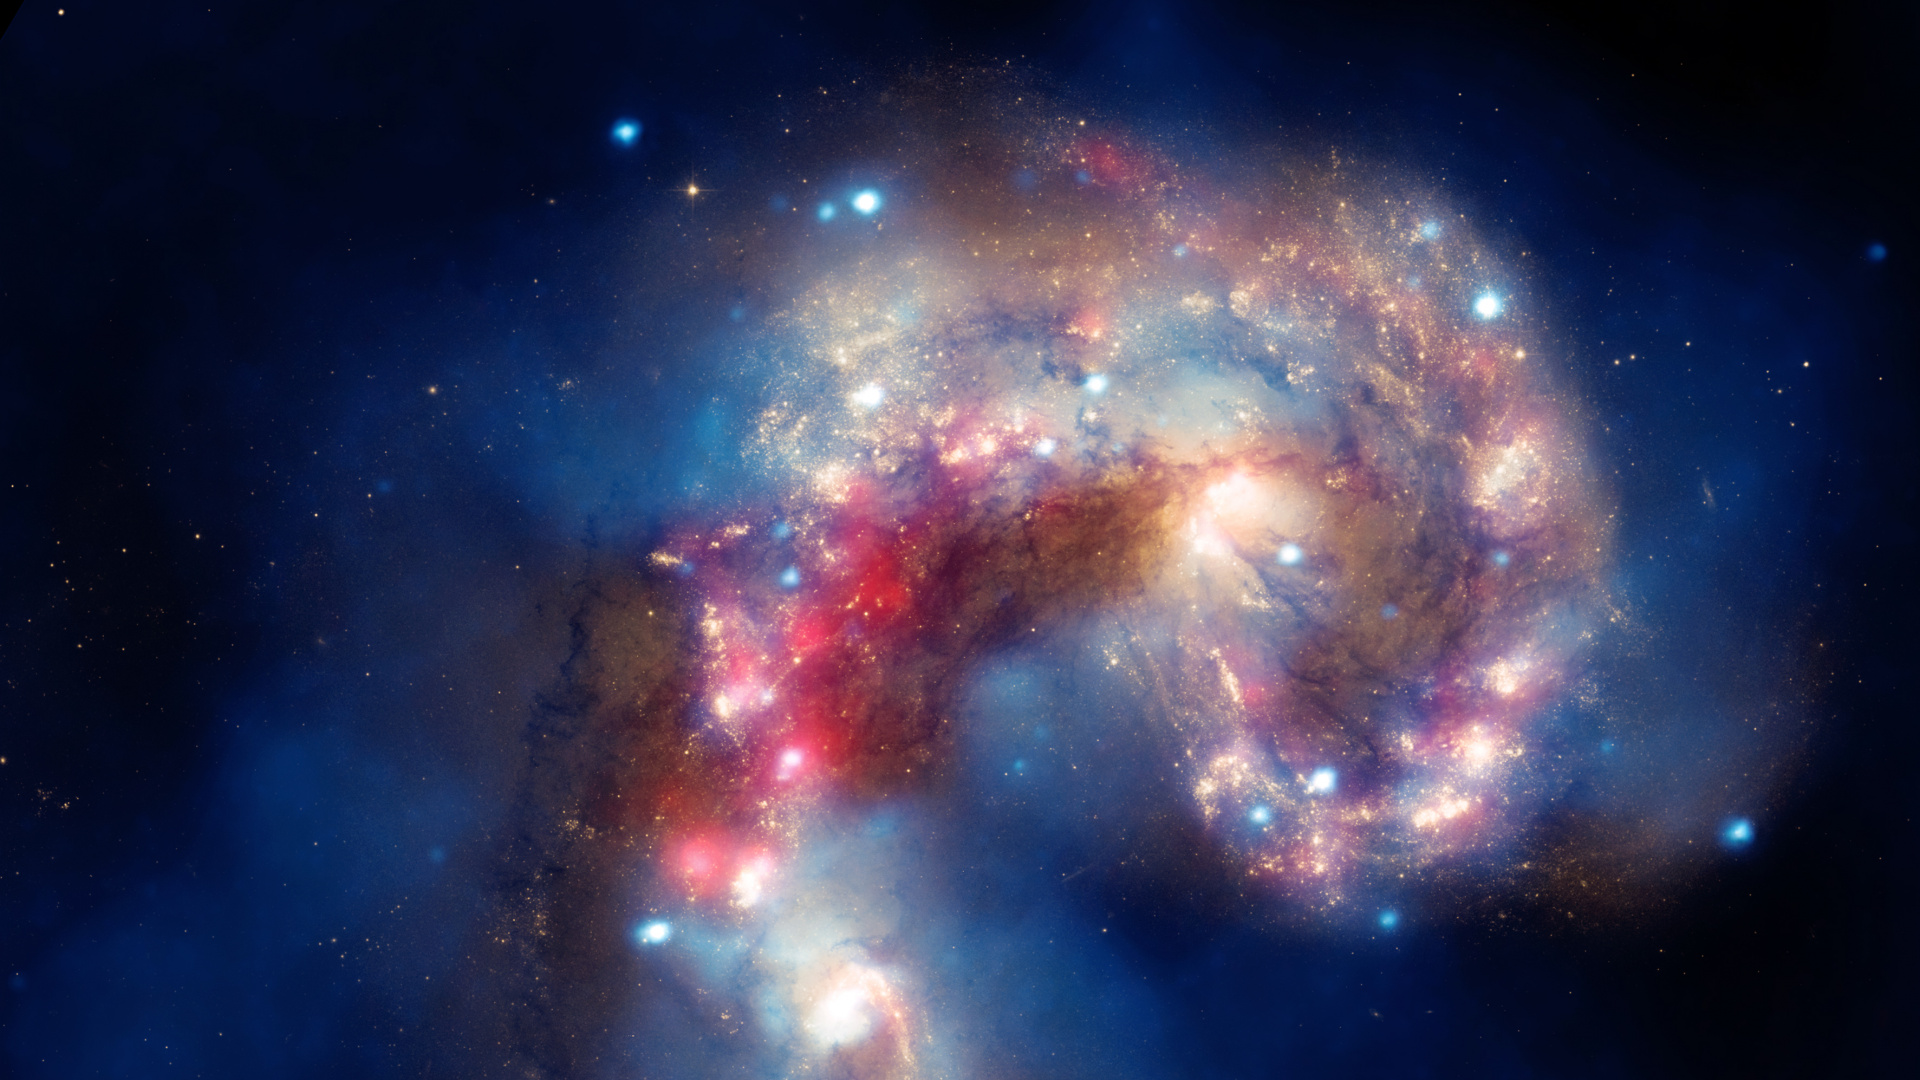 Blue and Red Galaxy Illustration. Wallpaper in 1920x1080 Resolution